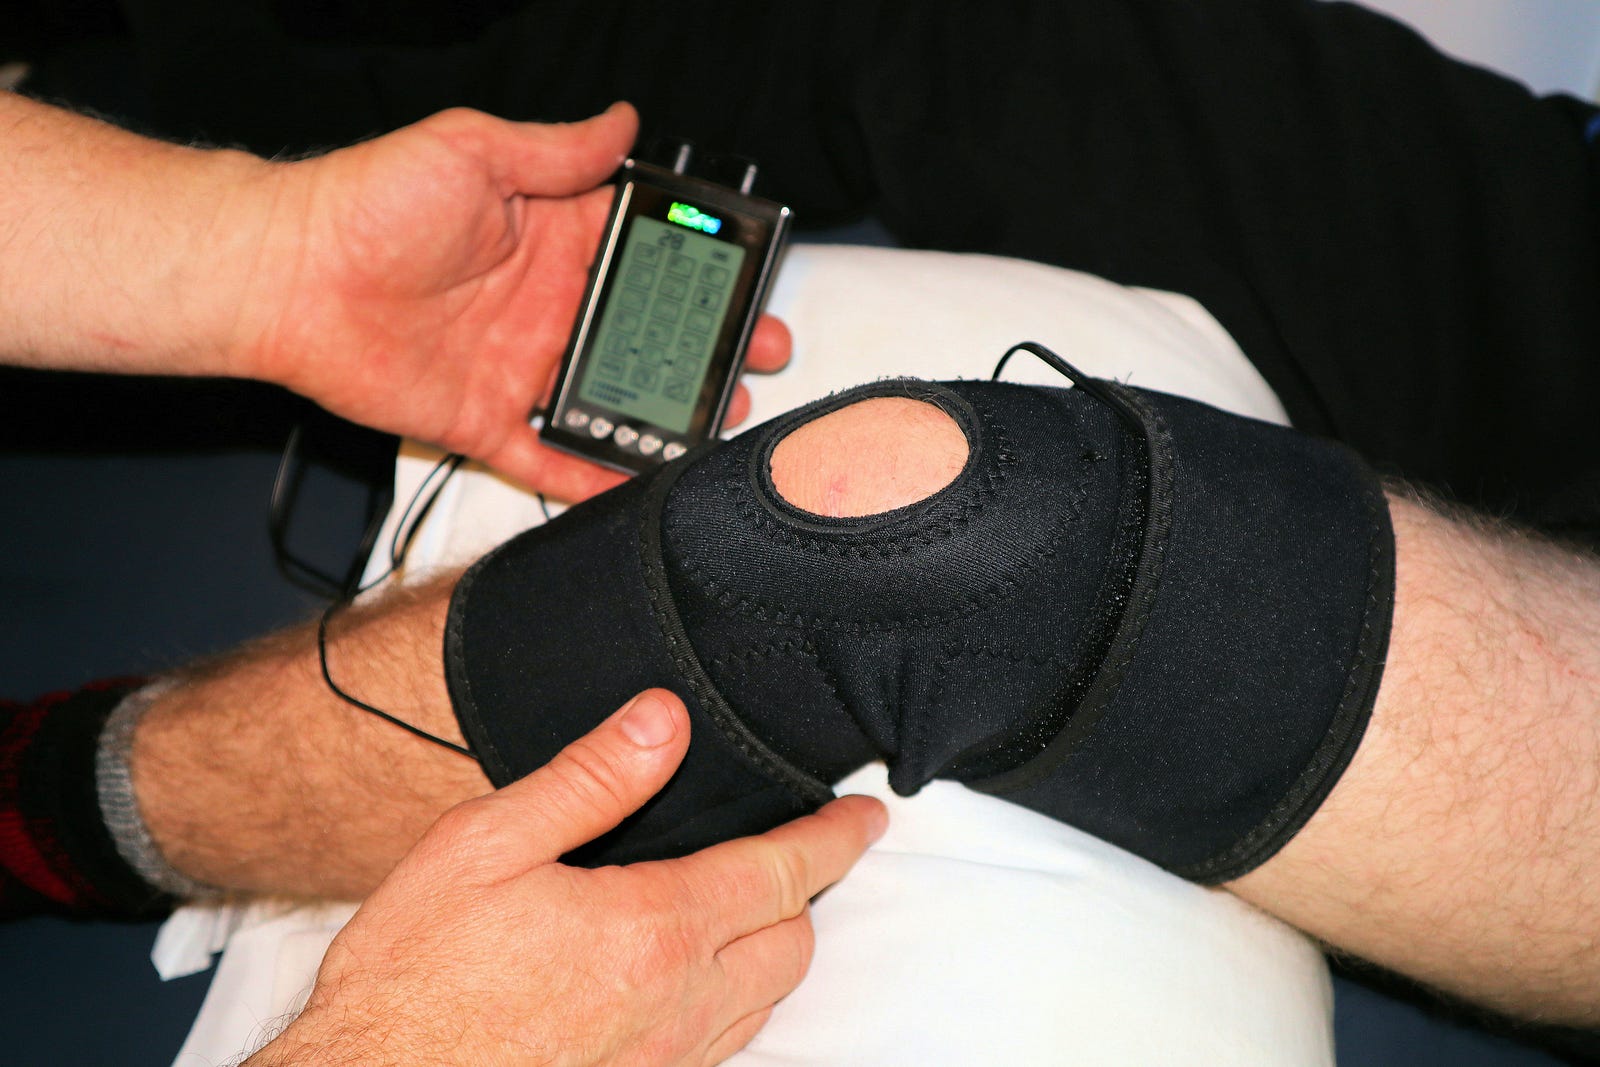 A left knee wears a brace, with an electric stimulator placed on their skin.